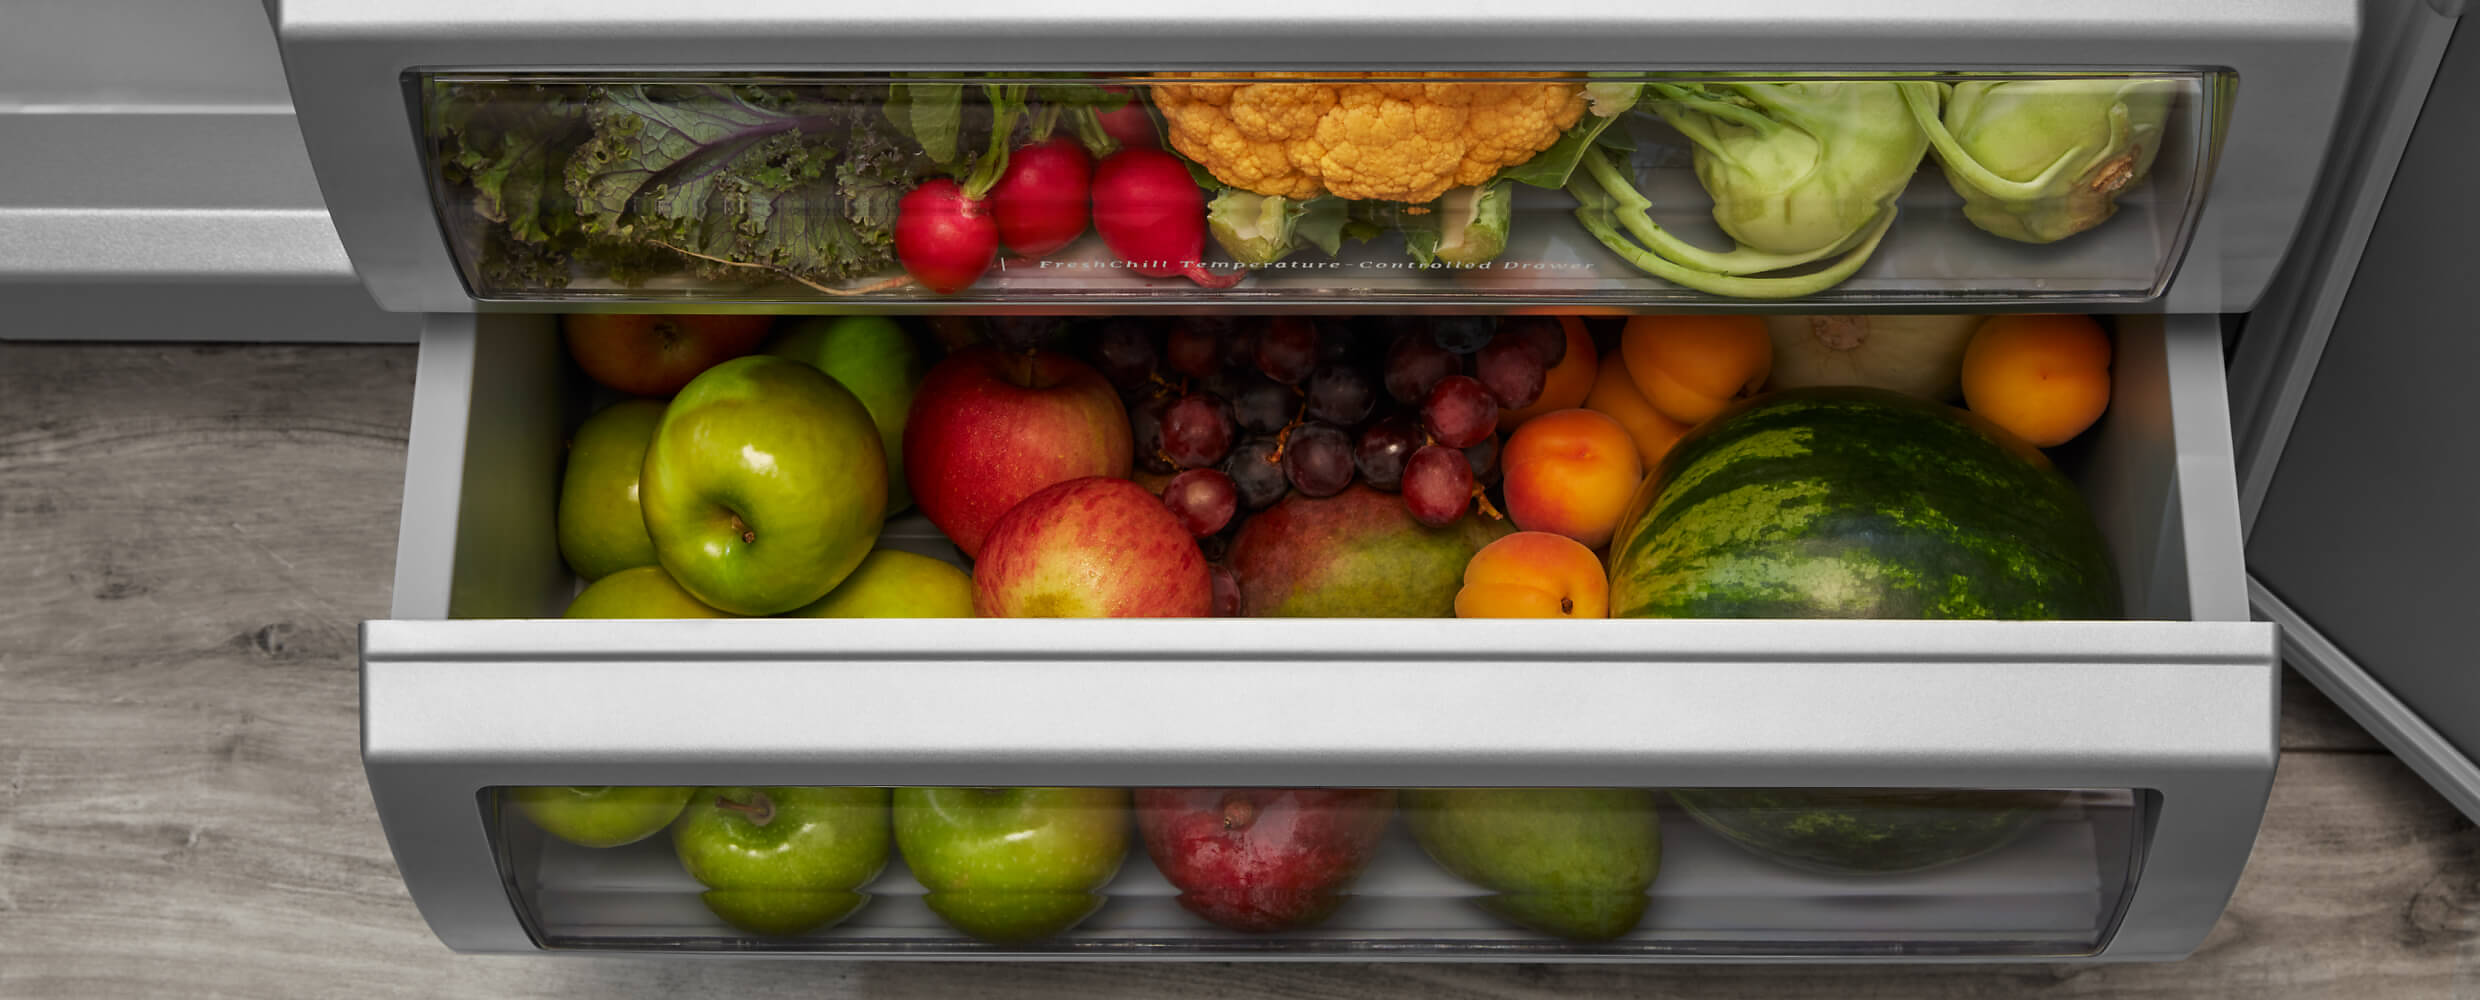 Produce in the FreshChill™ Temperature Controlled Drawer of the 36" KitchenAid® Built-In Side-by-Side Refrigerator